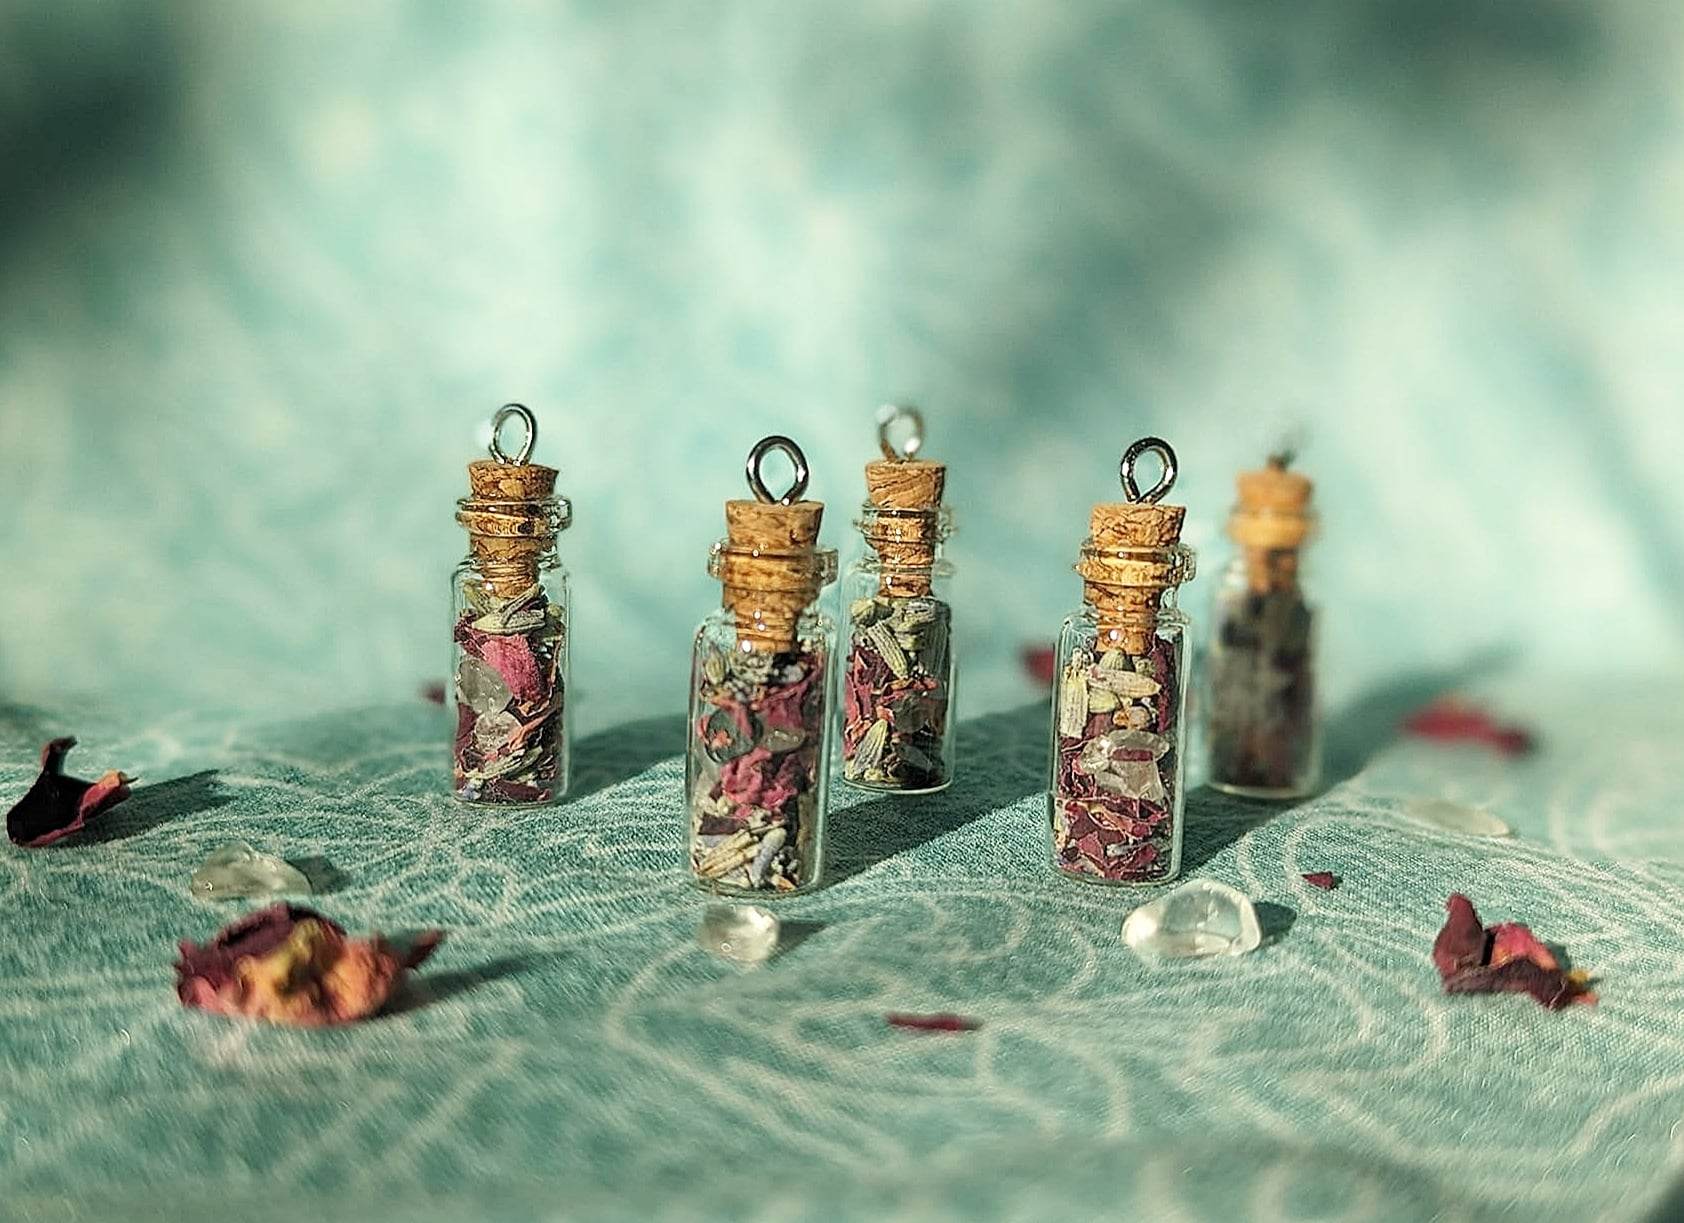 Herb and Crystal Energy Vial Necklaces - 6 Unique Themes - Love, Protection, Abundance, Peace, Psychic Enhancement, Health